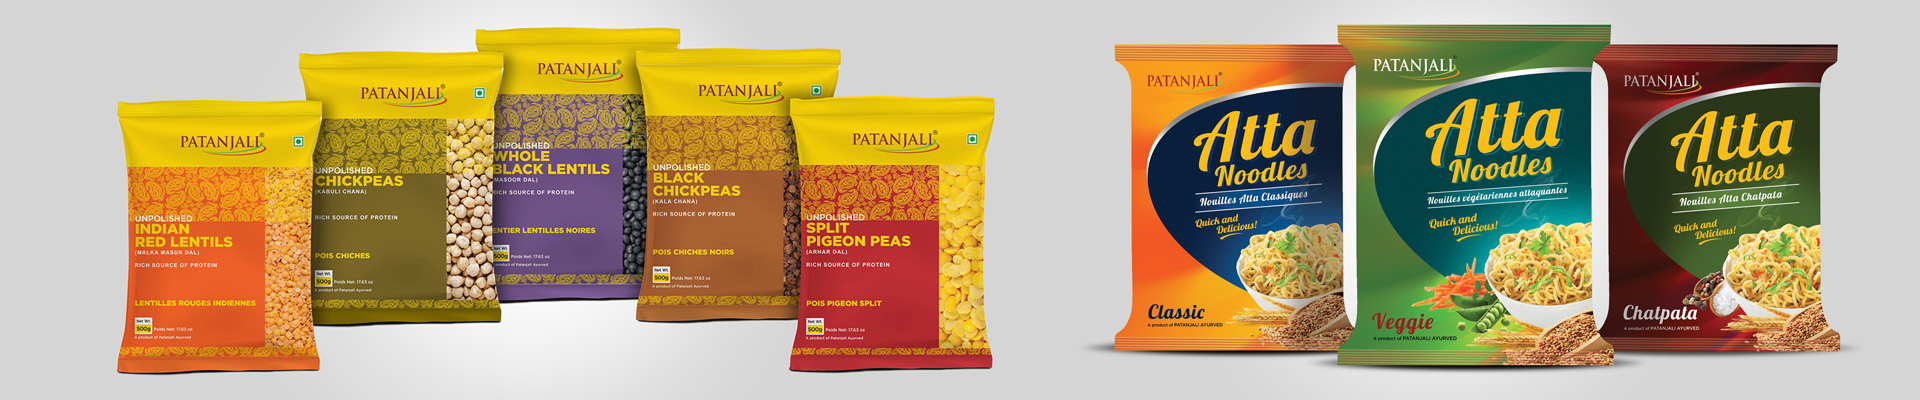 Patanjali’s New Age Design in Packaging | By Design